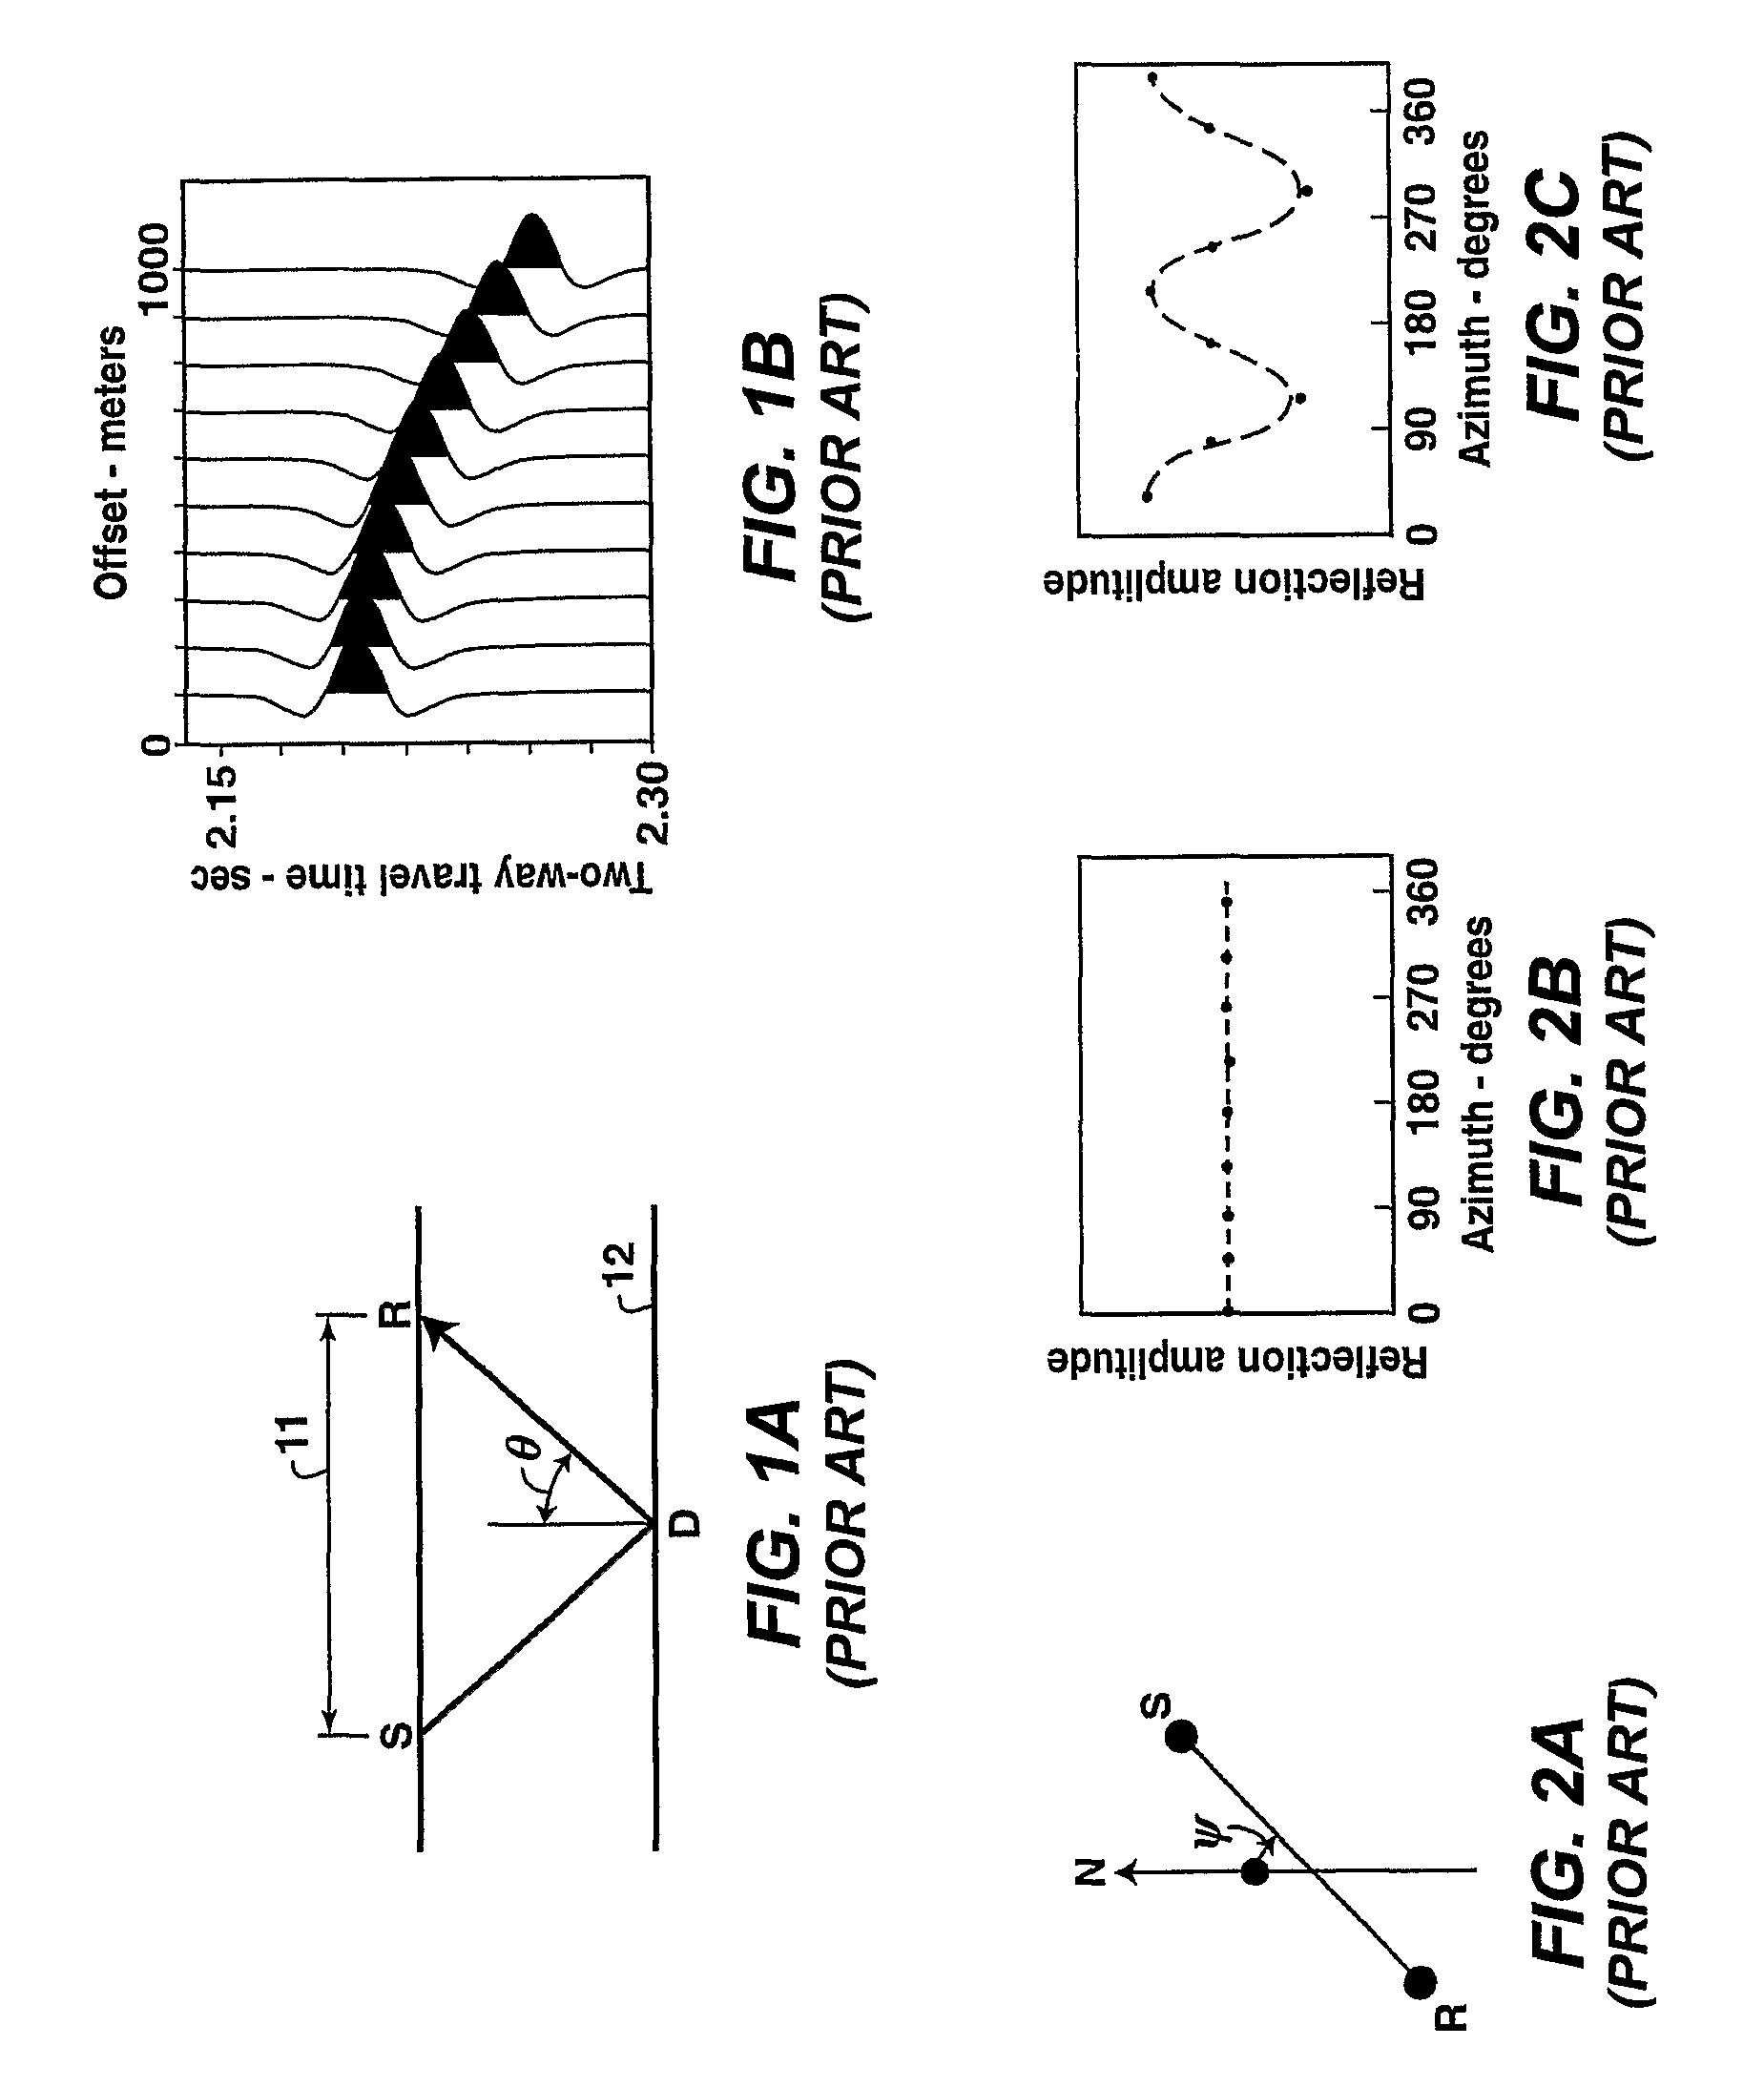 Method for quantification and mitigation for dip-induced azimuthal AVO